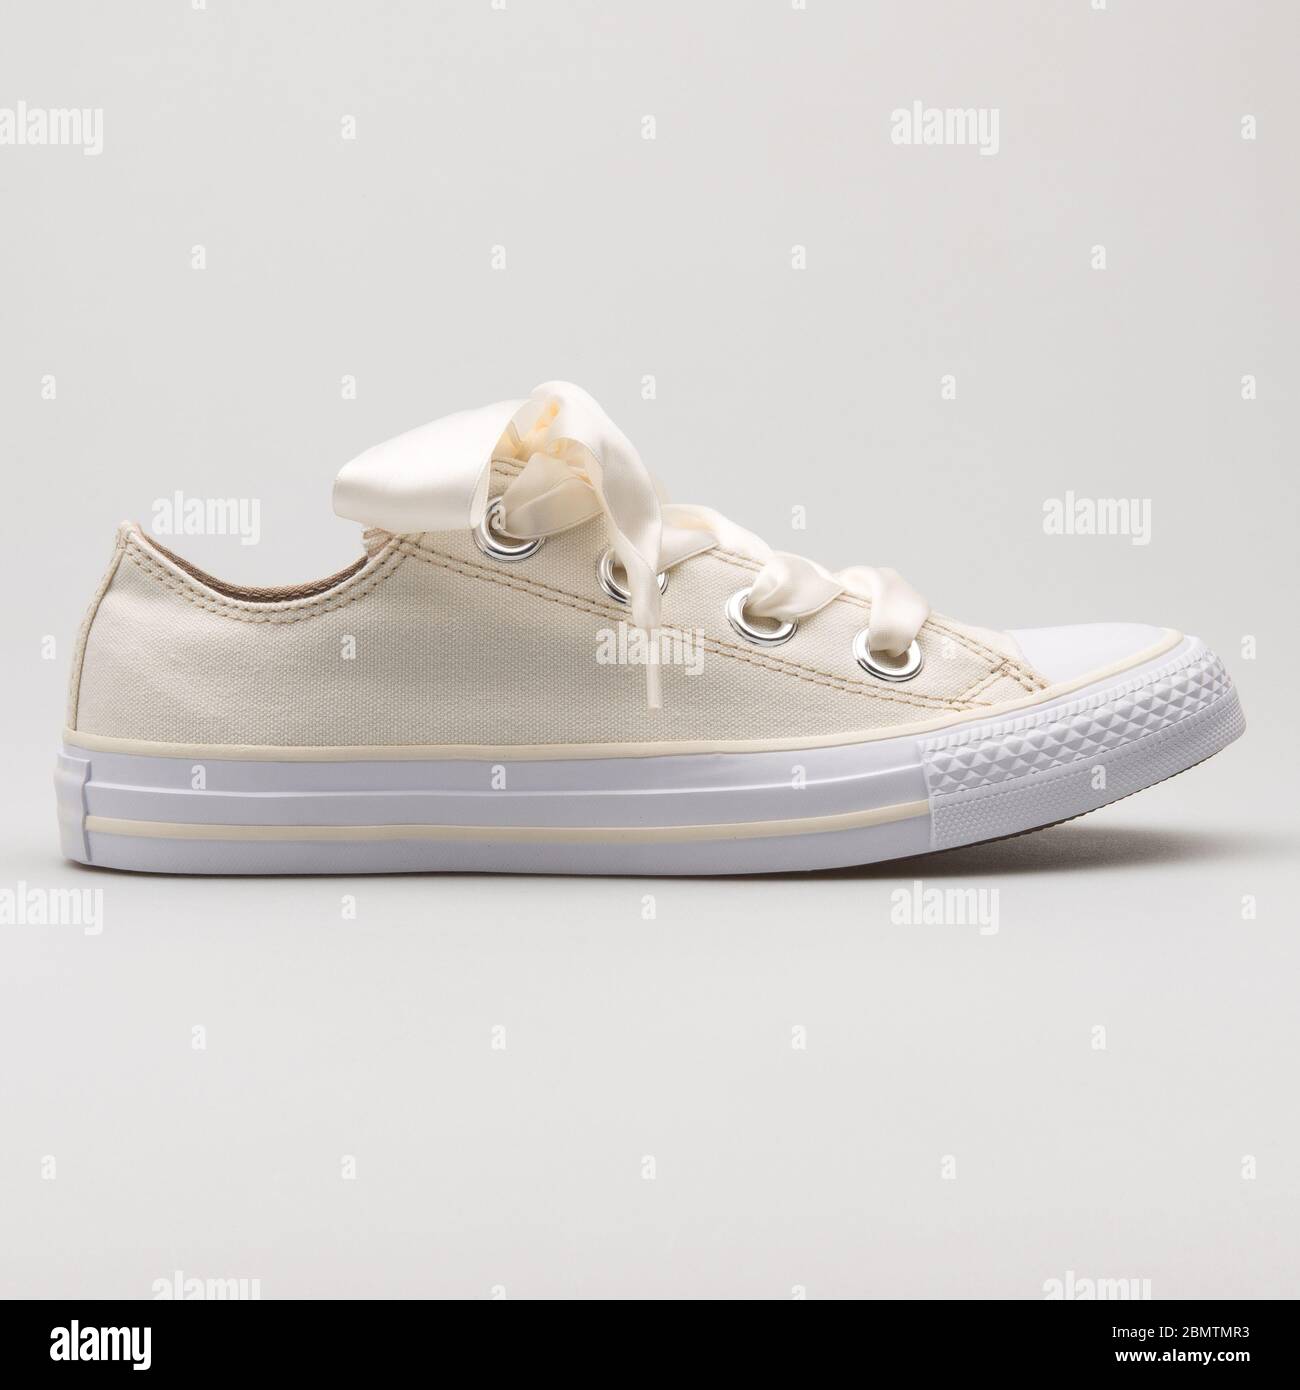 VIENNA, AUSTRIA - FEBRUARY 19, 2018: Converse Chuck Taylor All Star Big  Eyelets OX beige and white sneaker on white background Stock Photo - Alamy